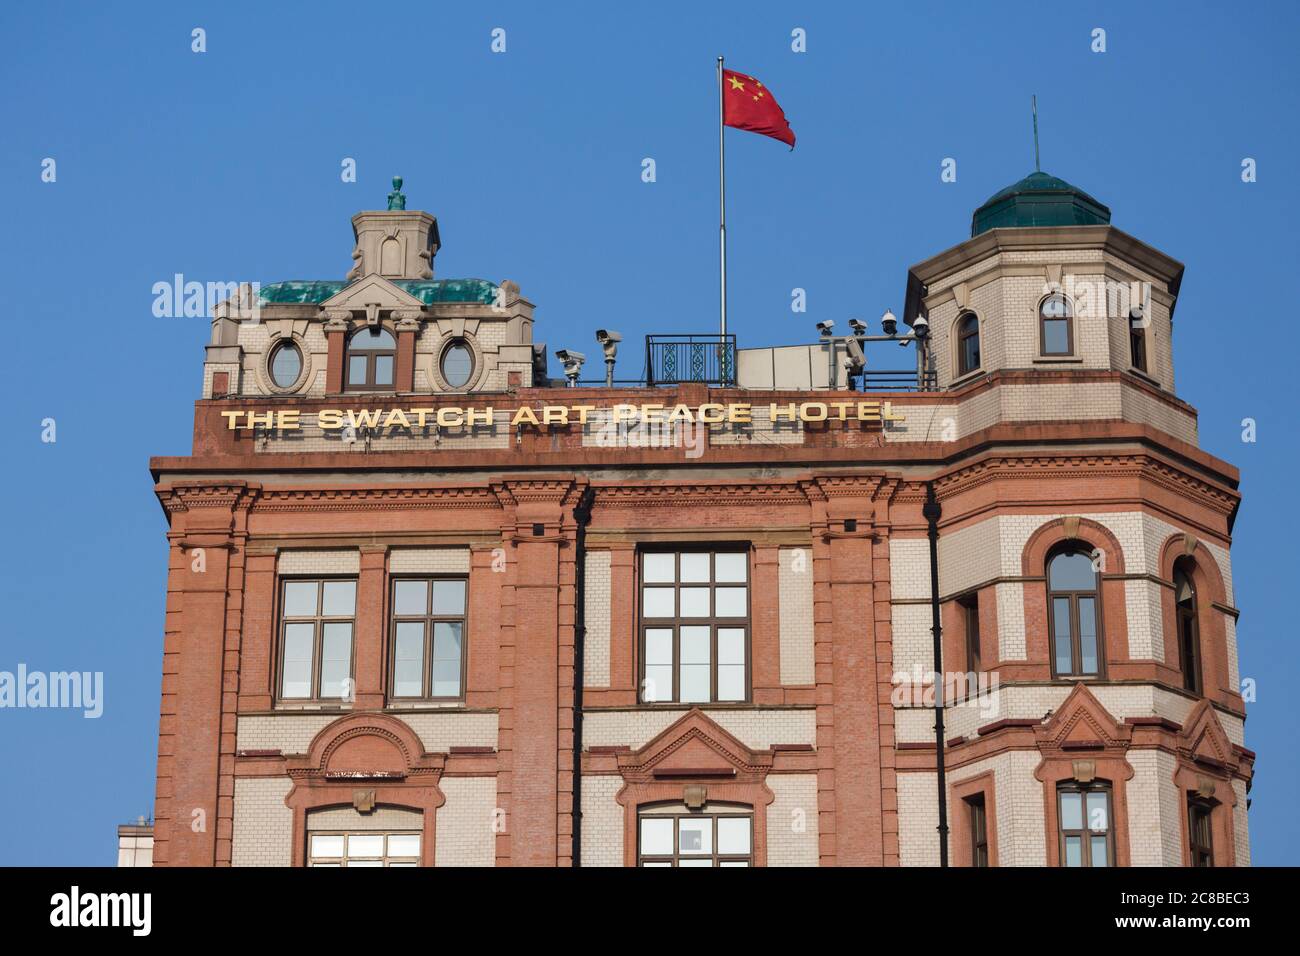 Shanghai, China - April 18, 2018: Close up of The Swatch Art Peace Hotel - one of the most famous hotels in Shanghai. With chinese flag and surveillan Stock Photo